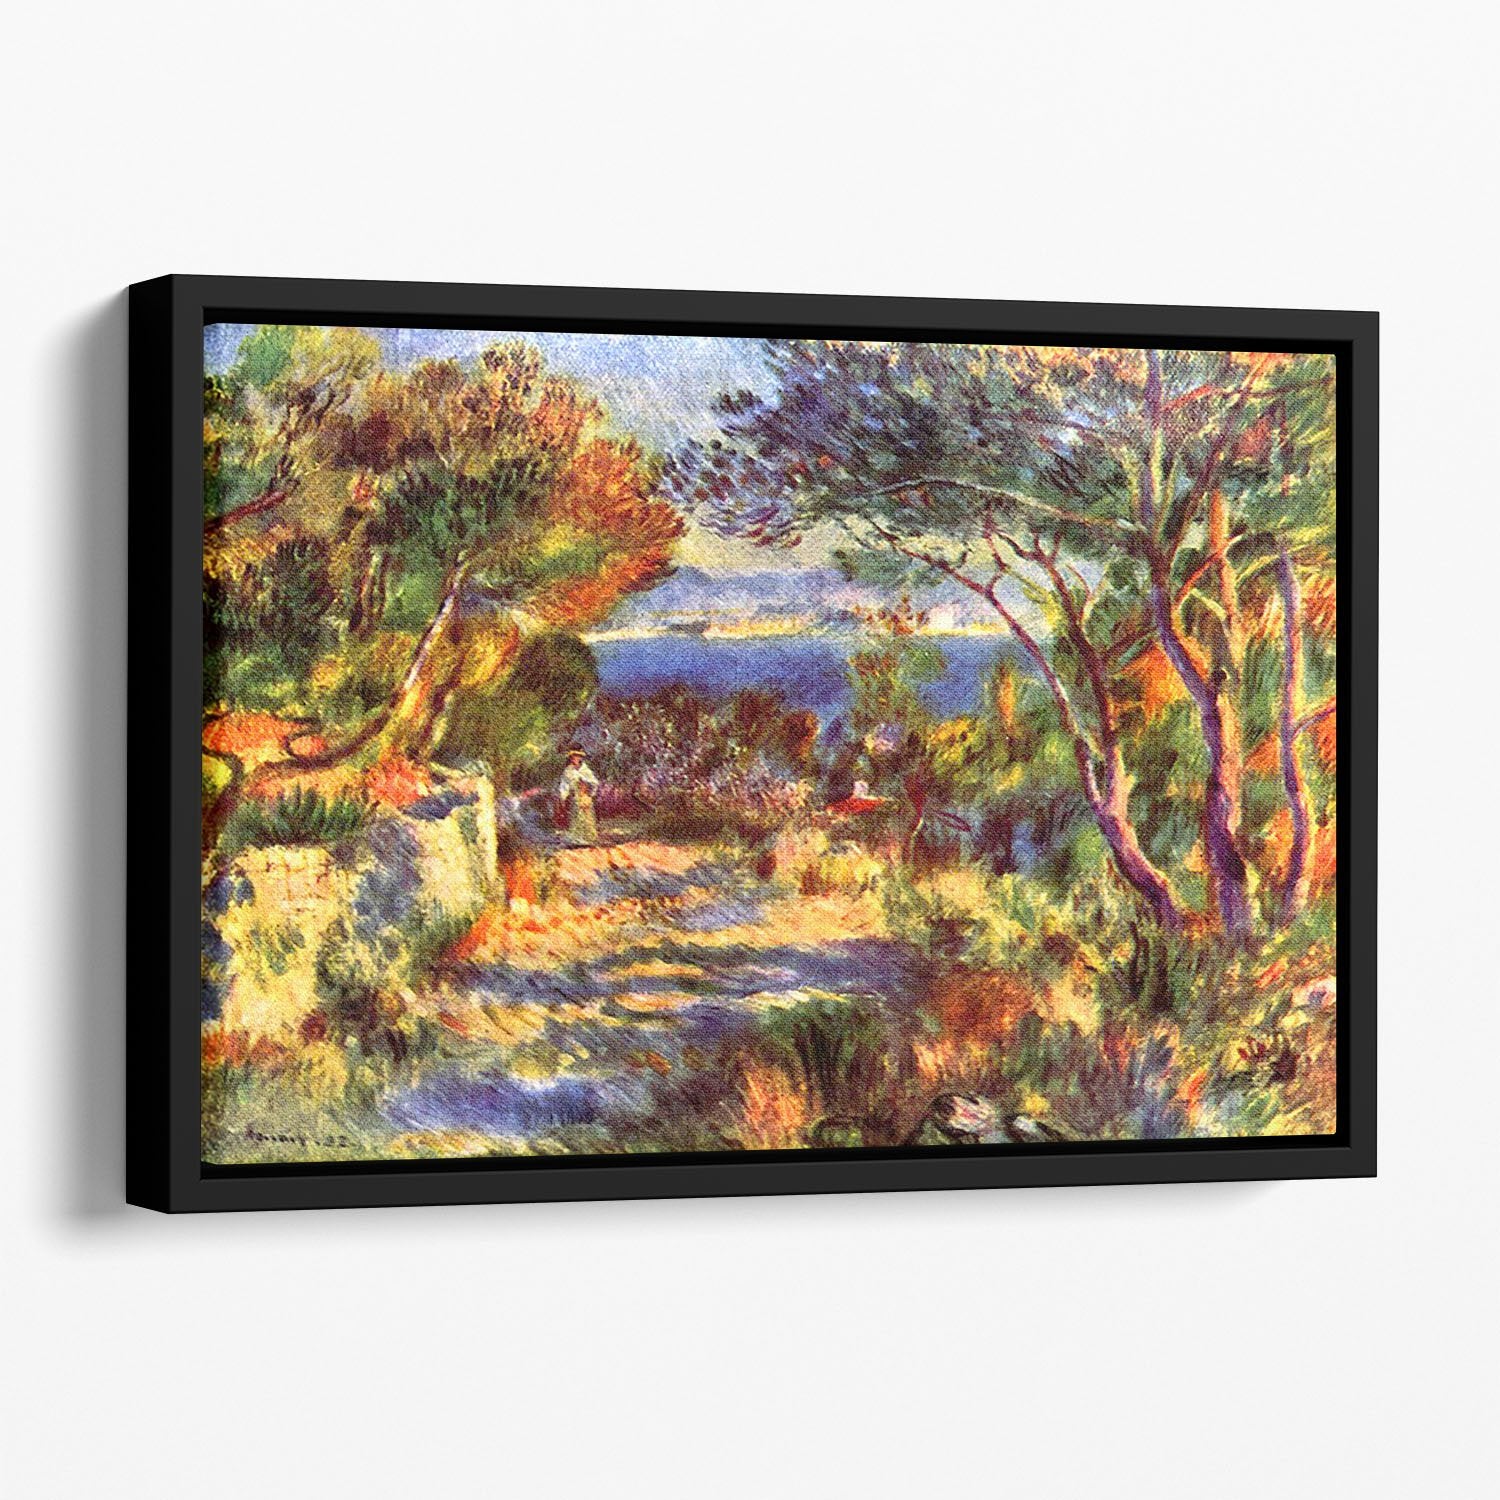 Le Staque by Renoir Floating Framed Canvas